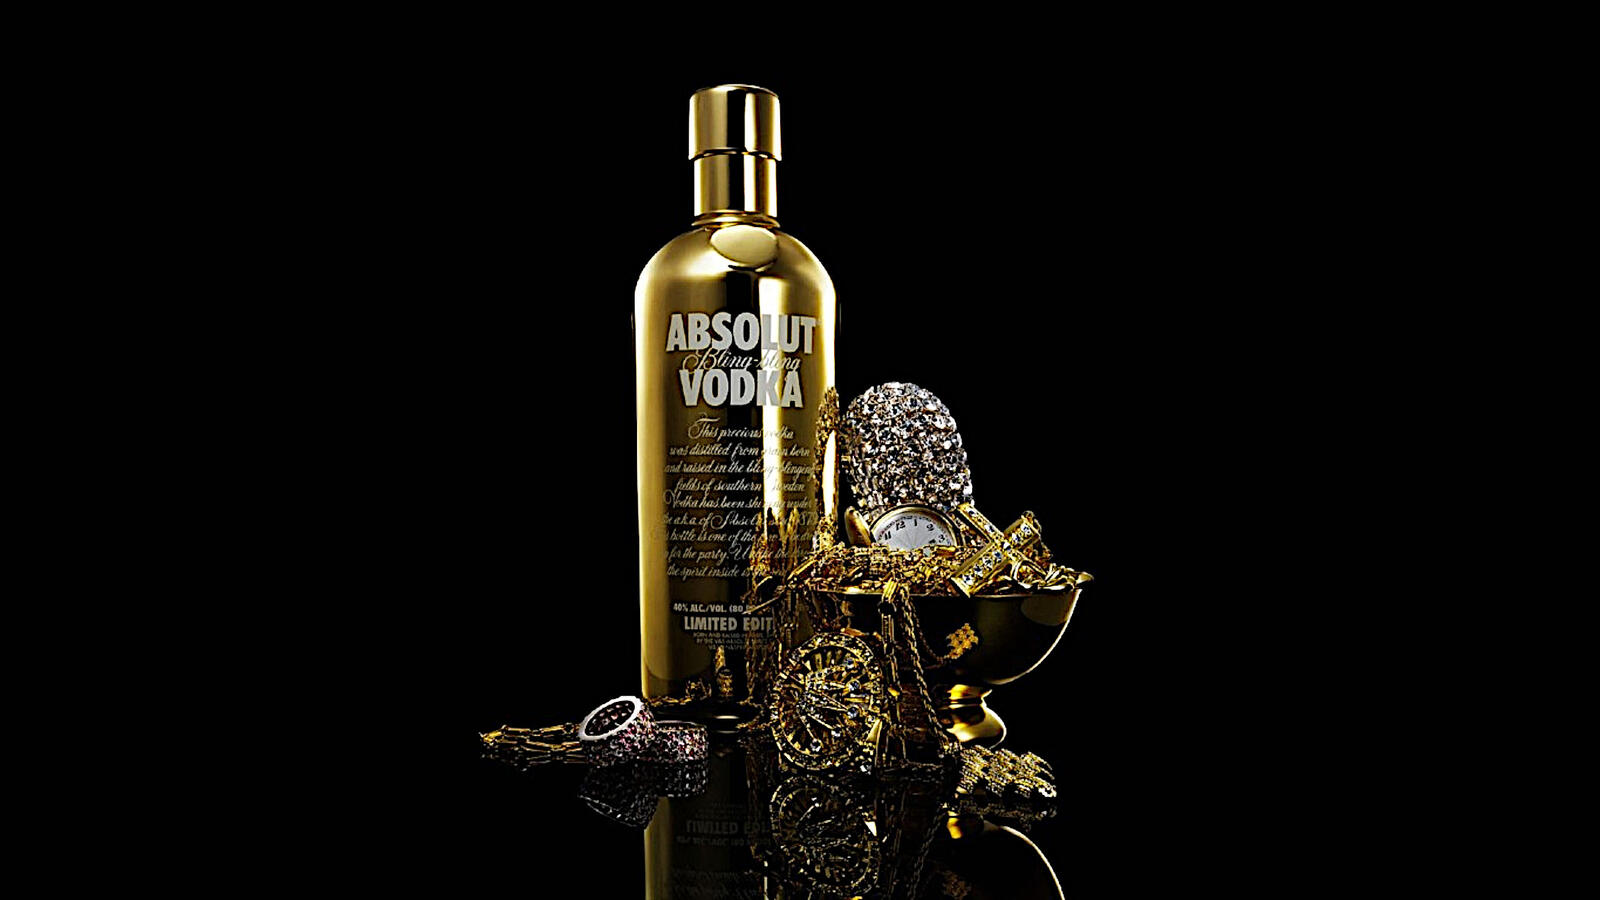 Free photo Vodka absolute with gold jewelry